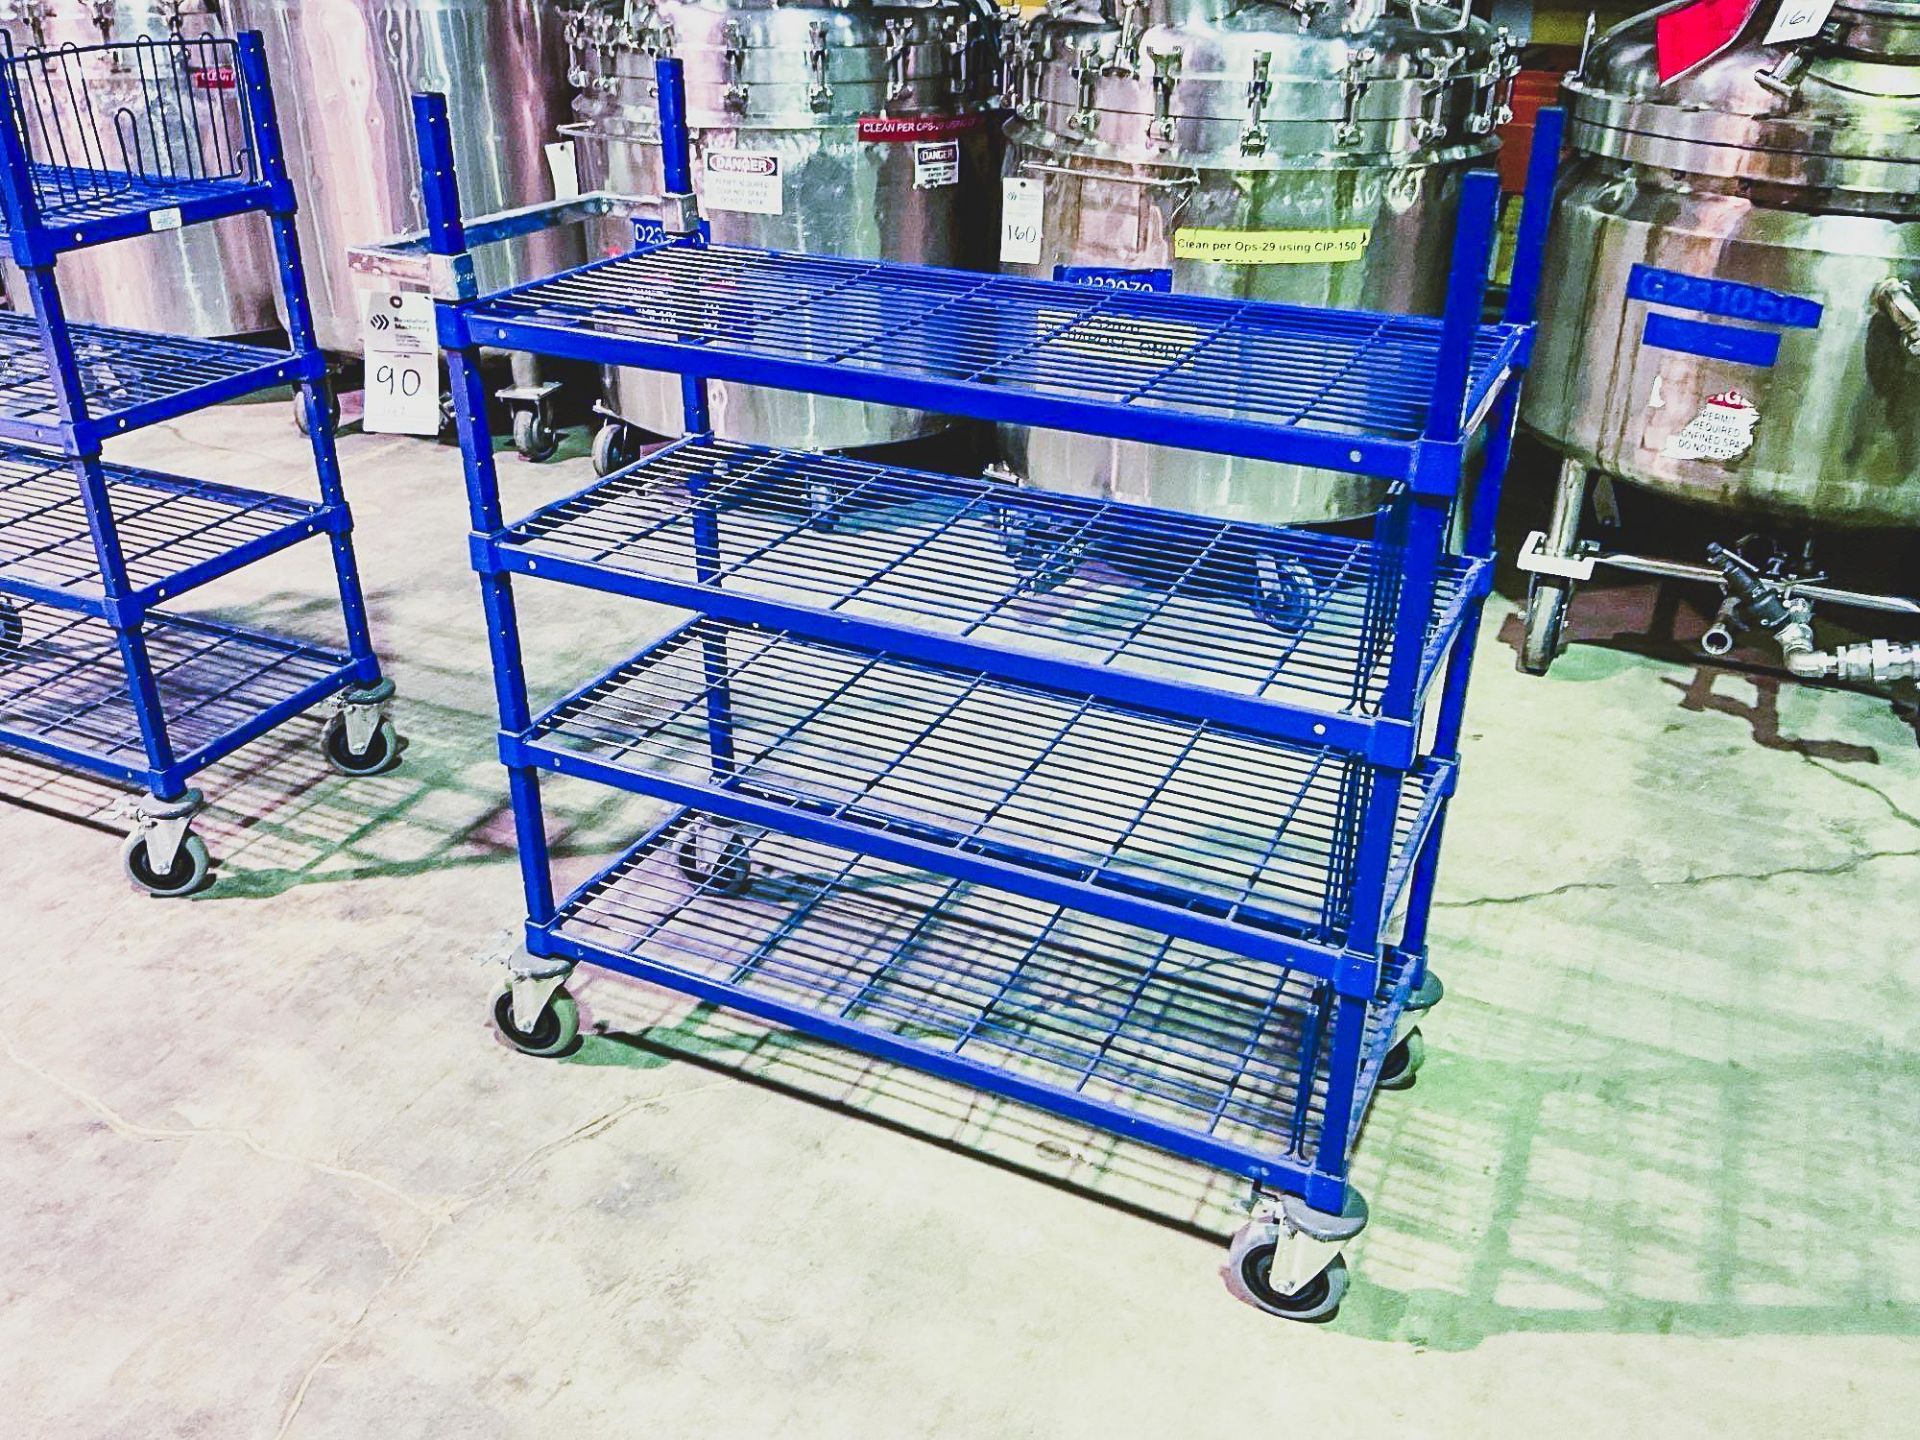 SHELVES ON CASTERS 48 INCH HIGH 18 INCH DEEP 42 INCH WIDE - Image 6 of 8